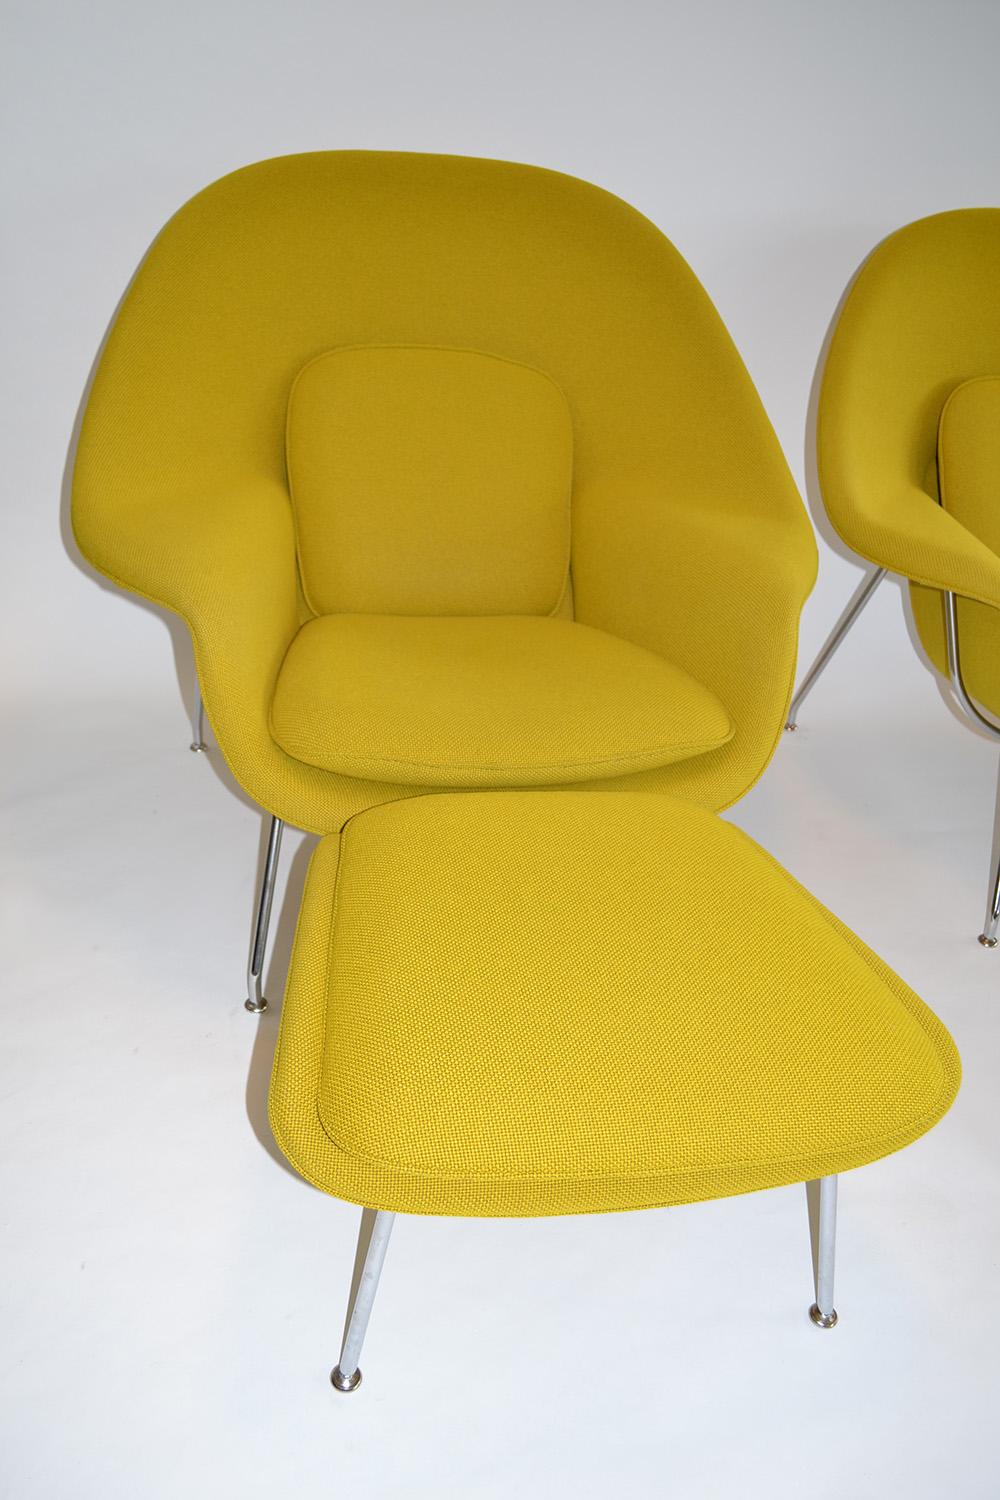 Pair of Saarinen knoll womb chairs and ottomans mid-century design, manufactured c. 2000's. Upholstered in Uni-Form KT collection basket-weave fabric. Color: Ochre. Original 40